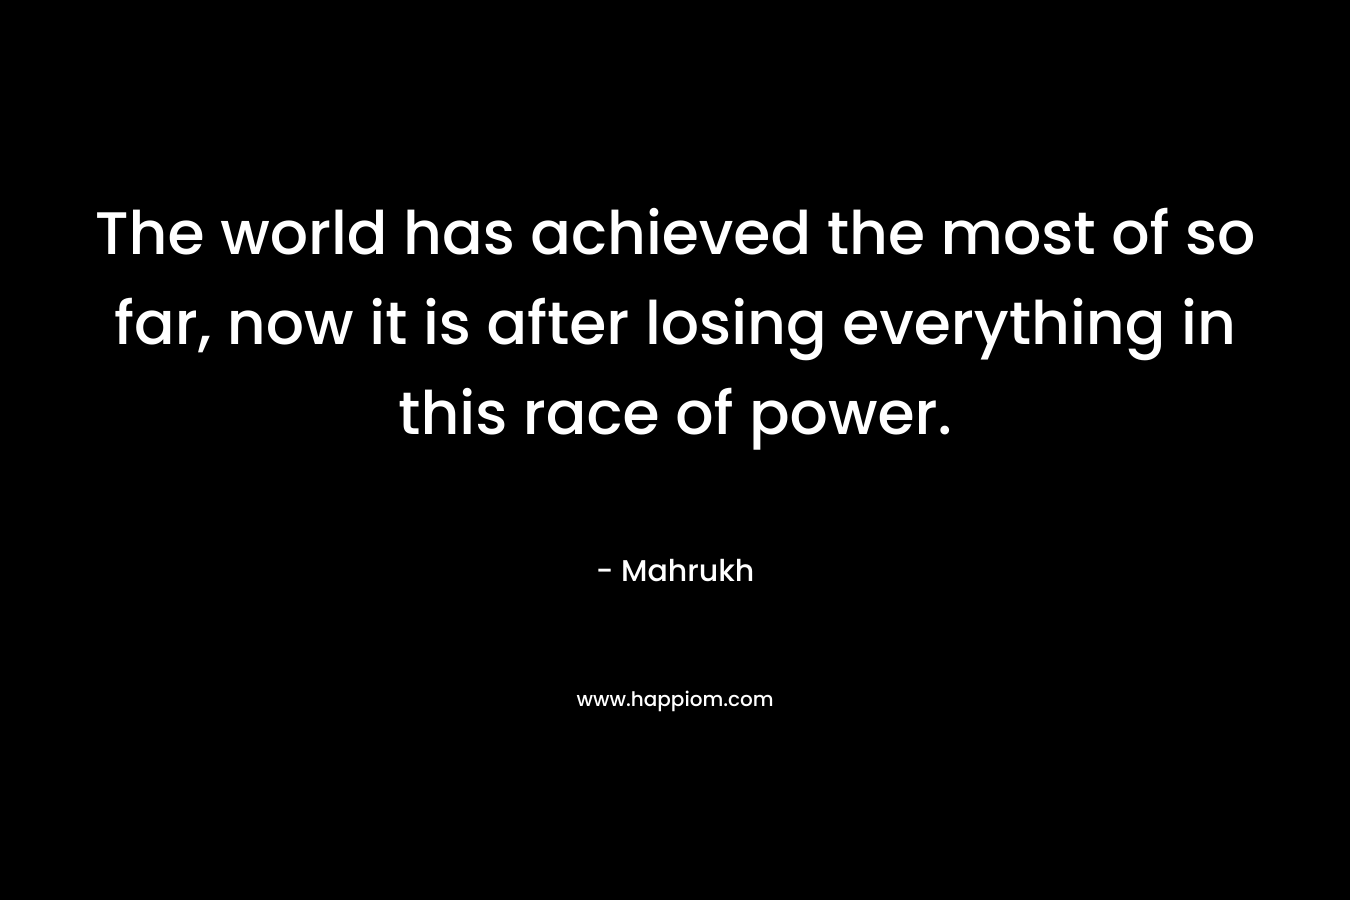 The world has achieved the most of so far, now it is after losing everything in this race of power.